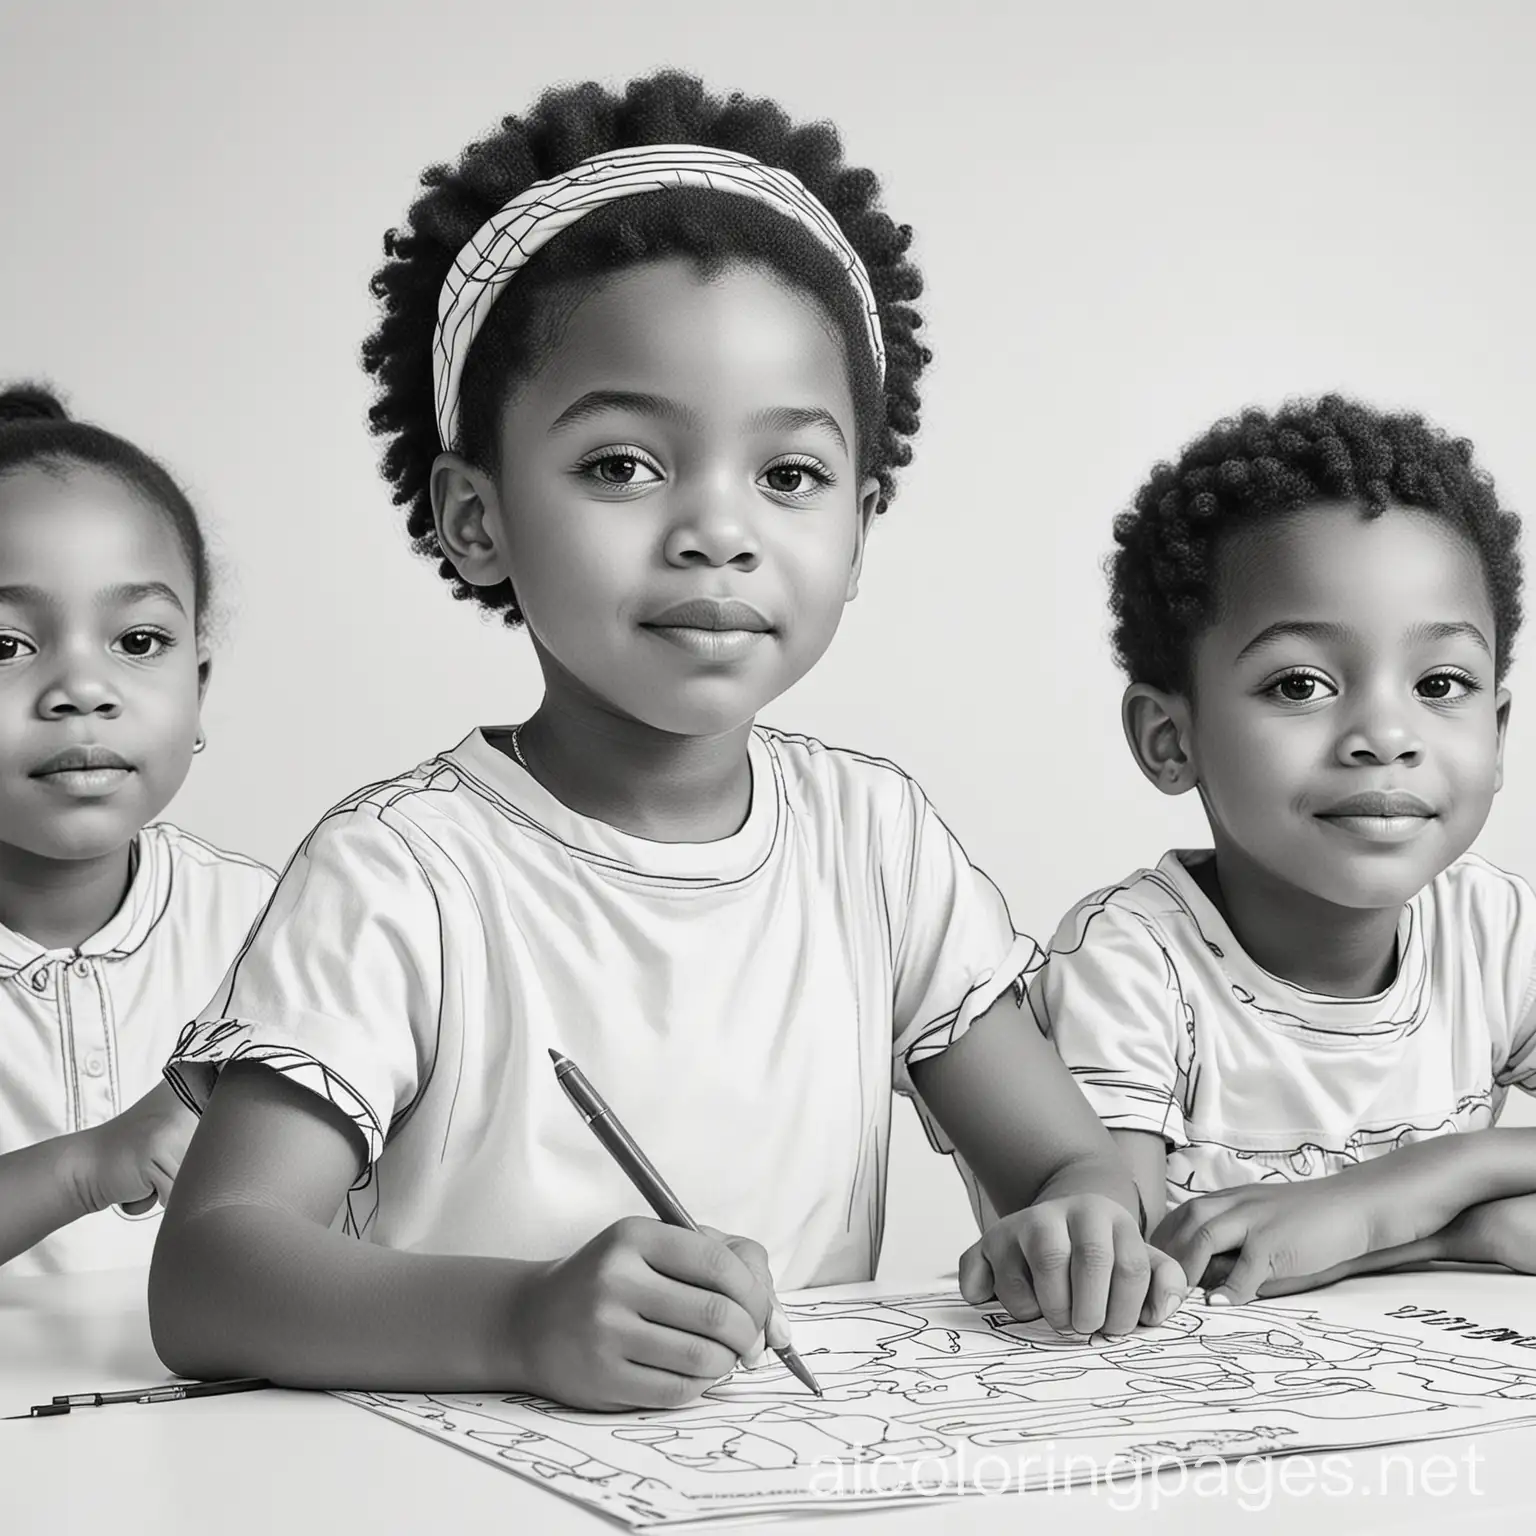 african america kids learning
, Coloring Page, black and white, line art, white background, Simplicity, Ample White Space. The background of the coloring page is plain white to make it easy for young children to color within the lines. The outlines of all the subjects are easy to distinguish, making it simple for kids to color without too much difficulty